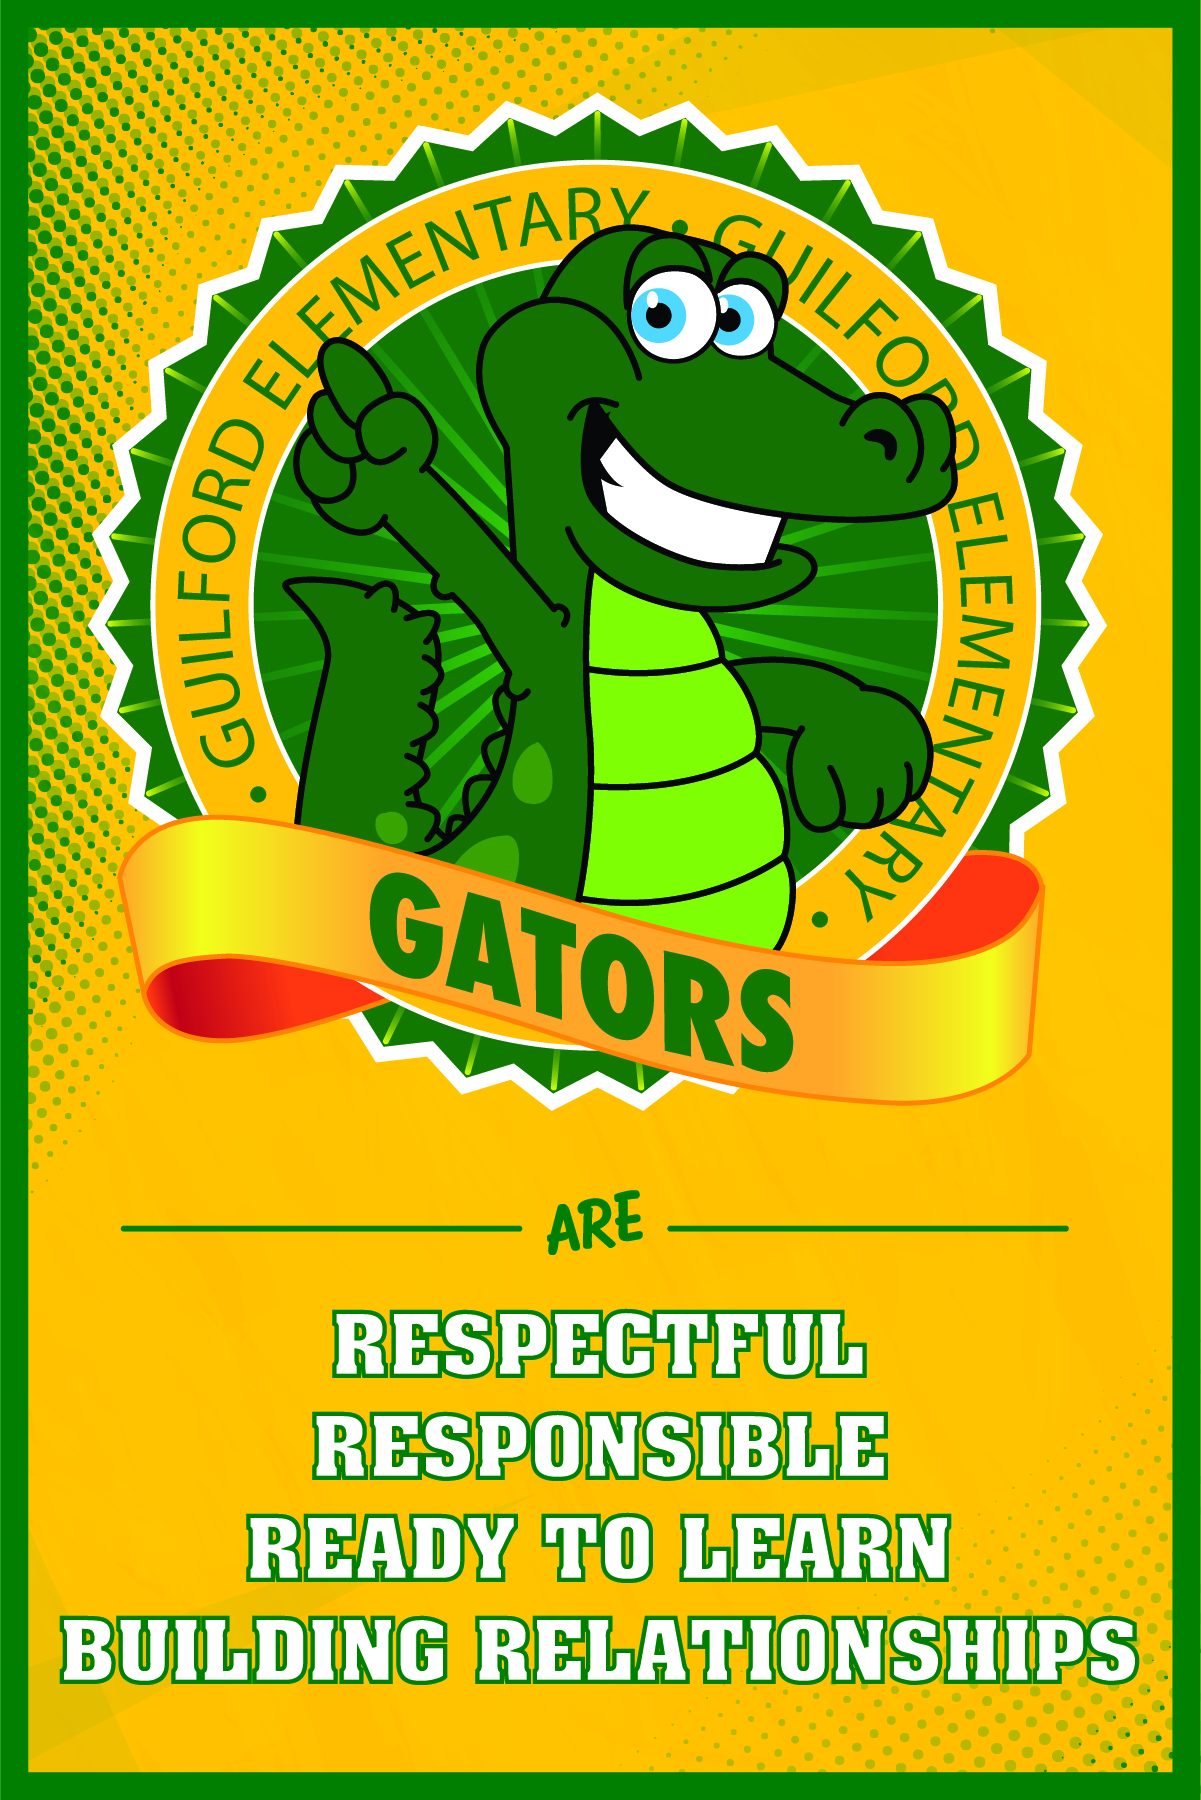 Gators are respectful, responsible, ready to learn, building relationships